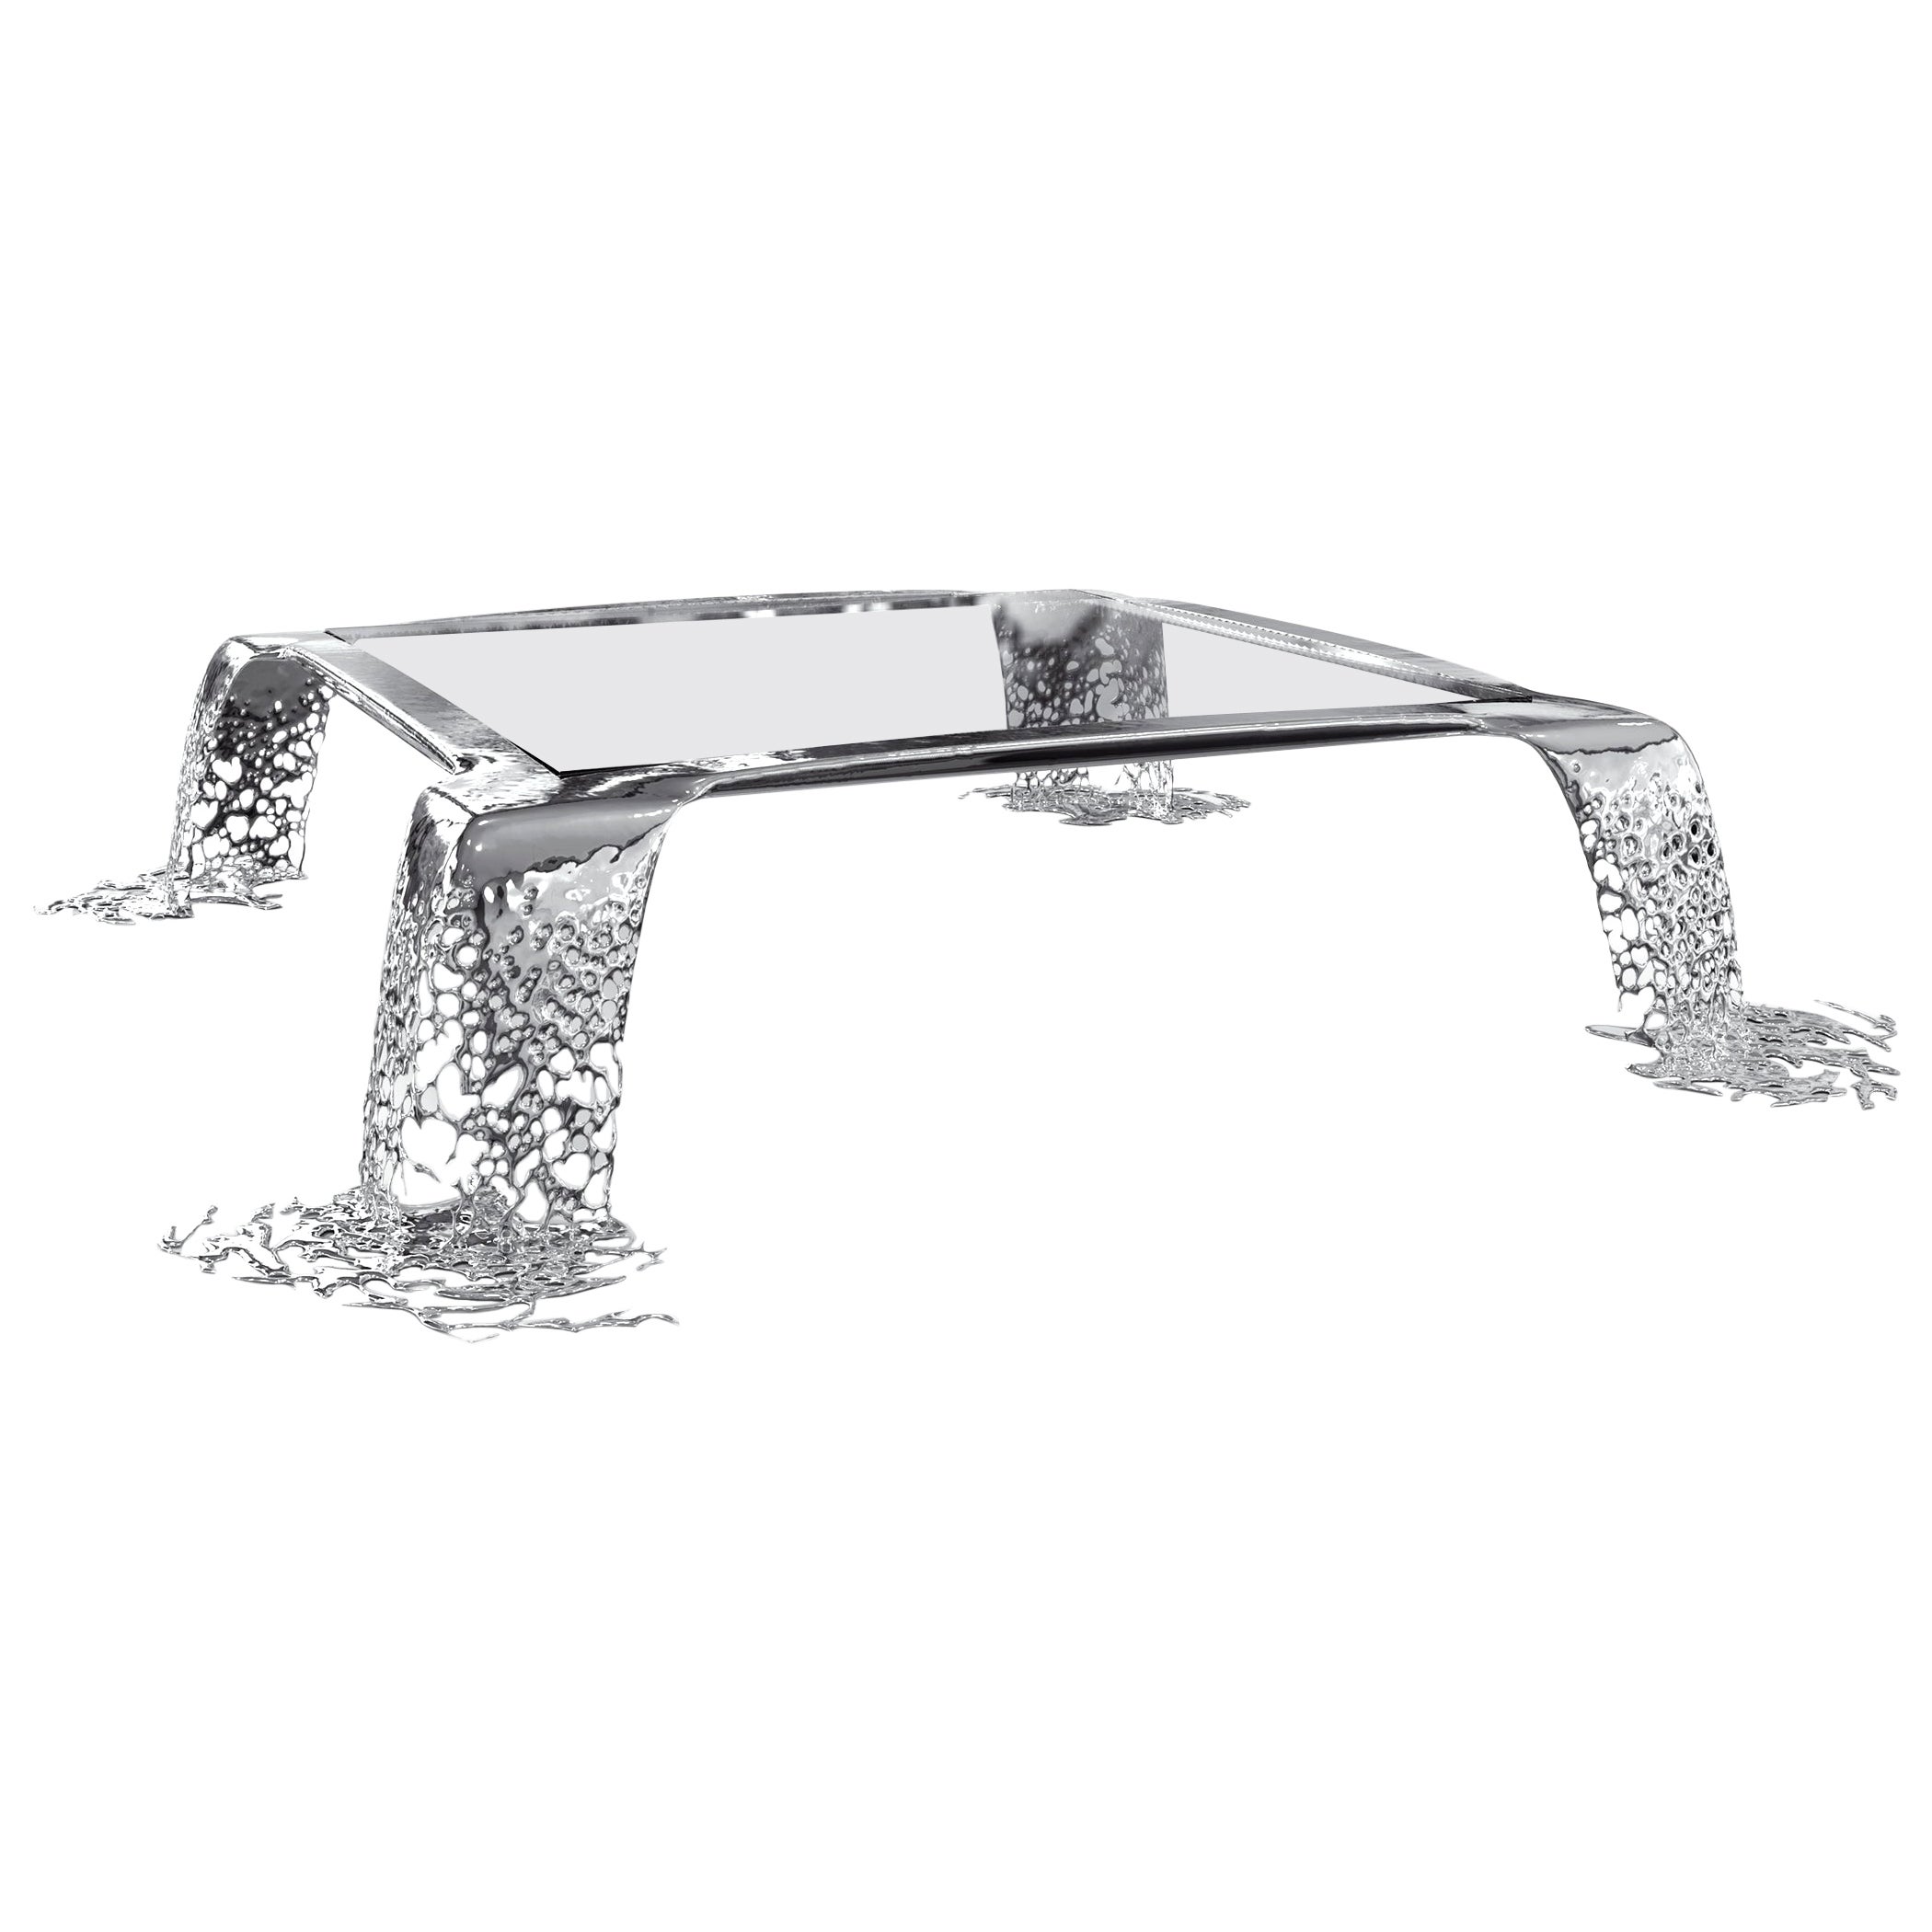 Cascatta Stainless Steel Mirror Polish Square Dining Table For Sale